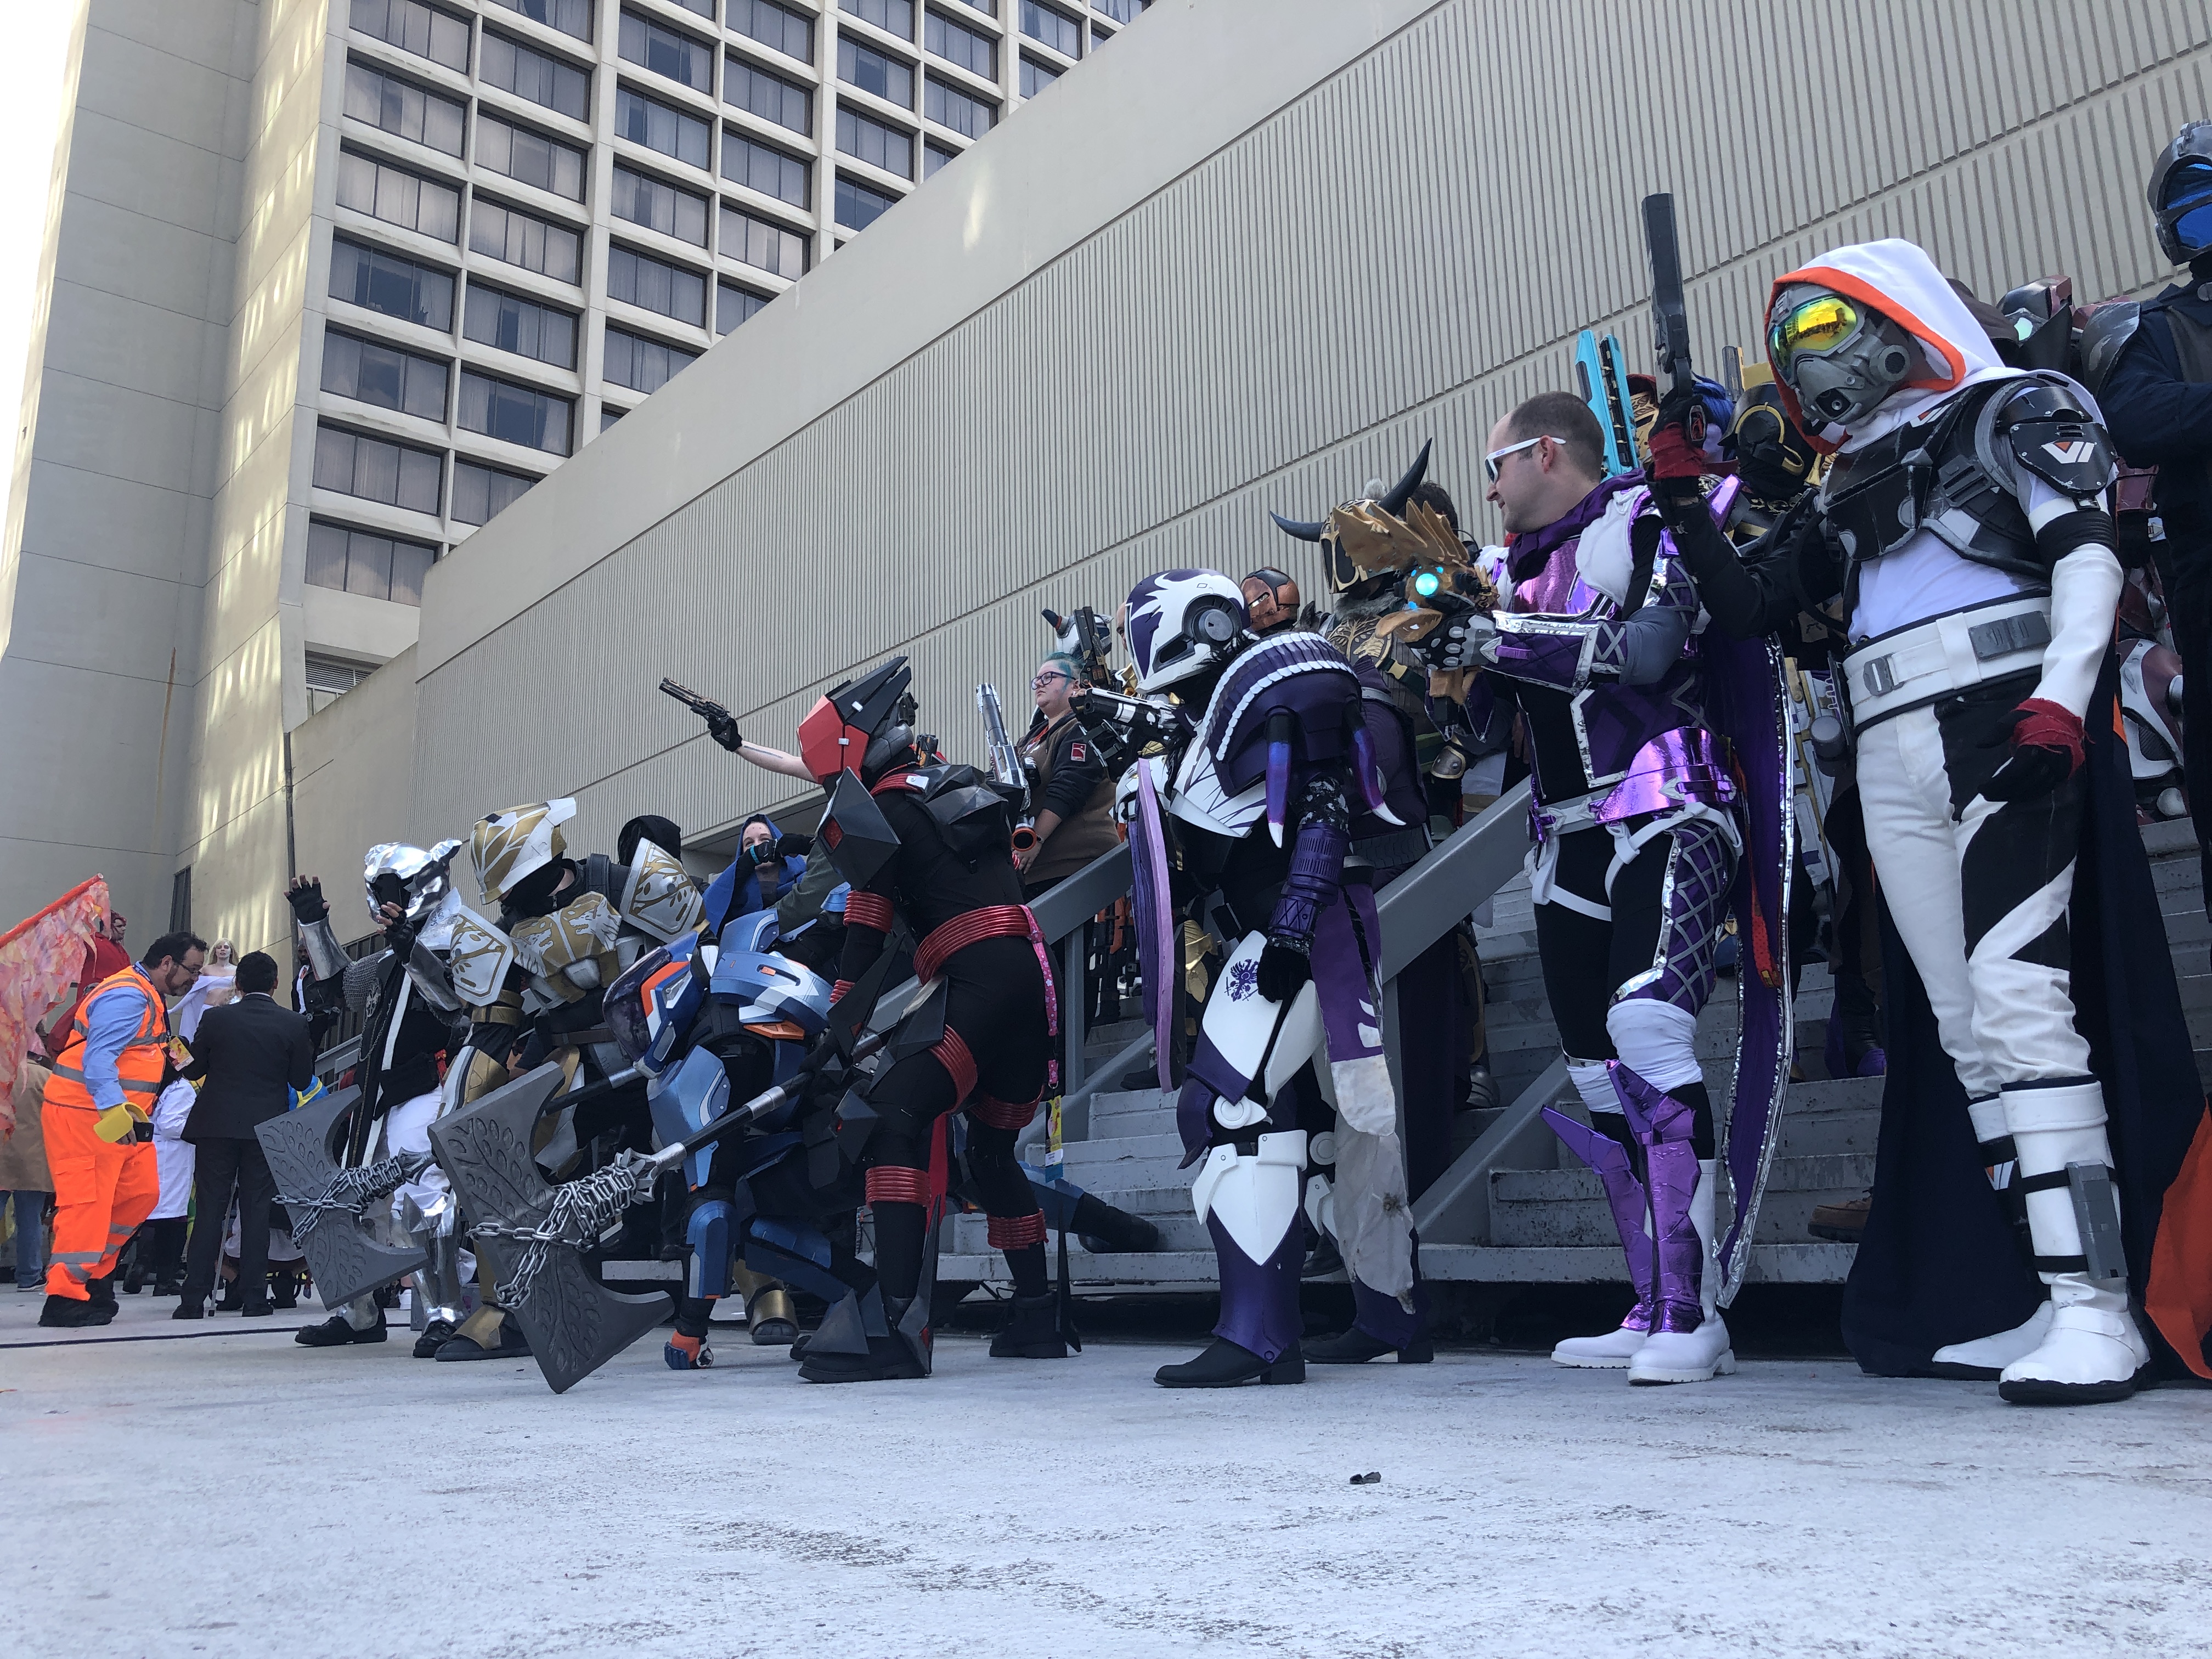 Cosplayers suited up in armor from the video game Destiny pose for cameras at Dragon Con in 2019.